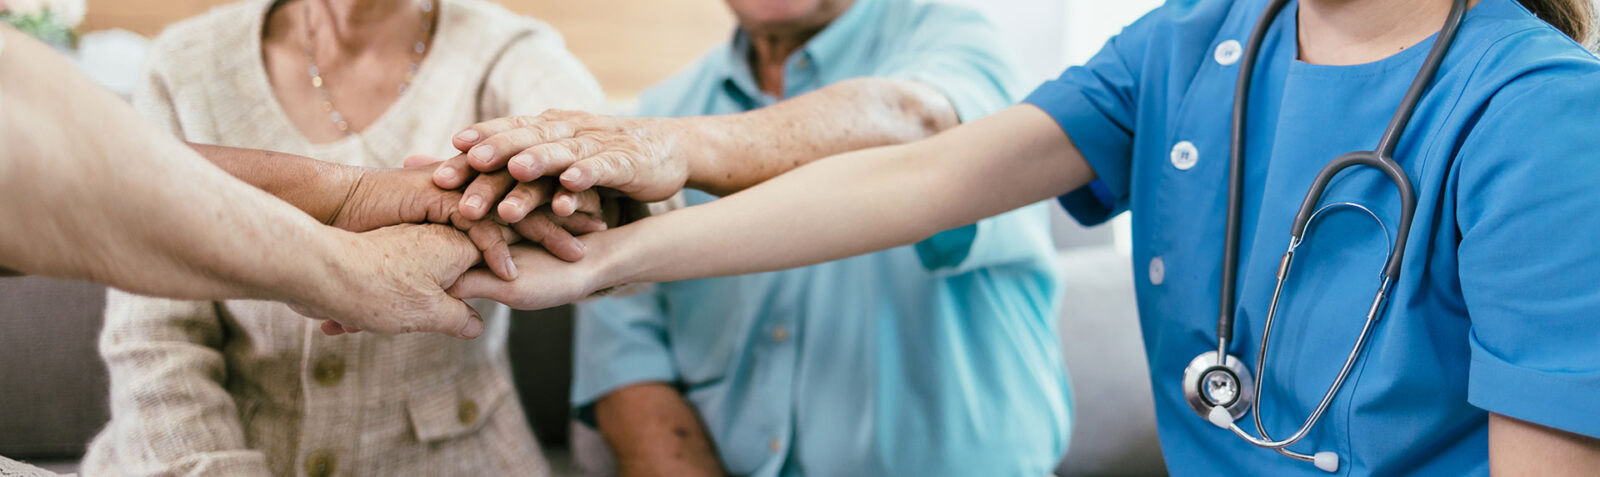 Background of elderly human bare hands join together in the middle under with indoors light. Concept Elderly nursing care help and support. Service mind for senior people.